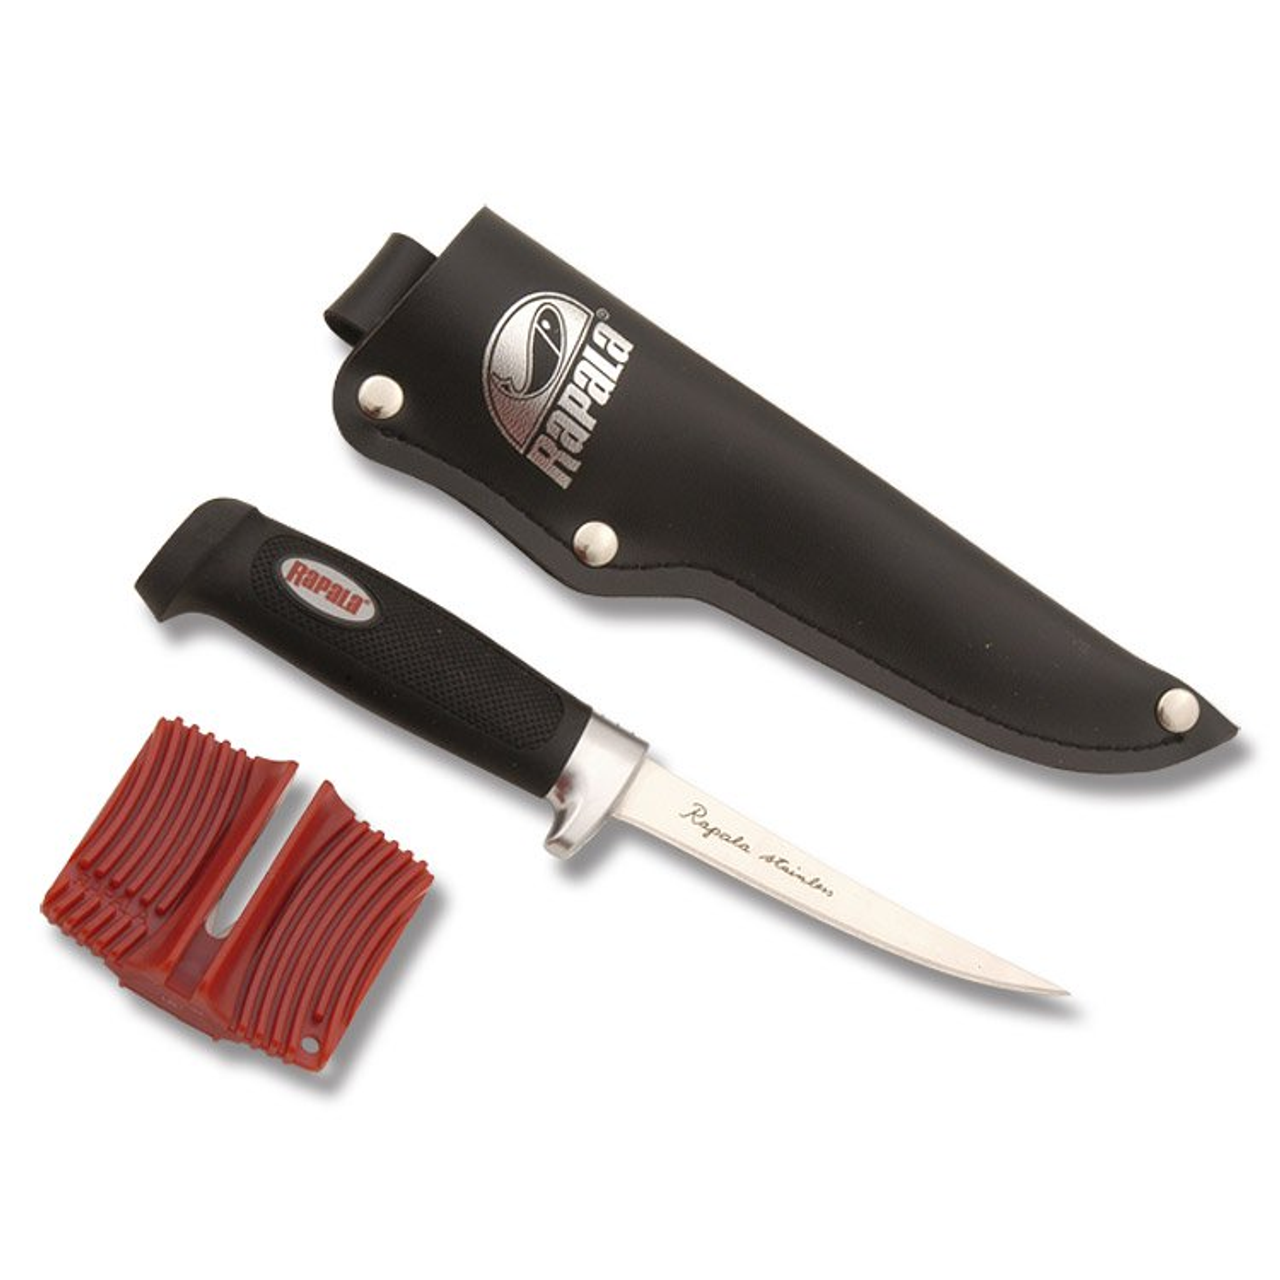 Rapala SoftGrip 4 Fillet Knife with Sharpener - Smoky Mountain Knife Works